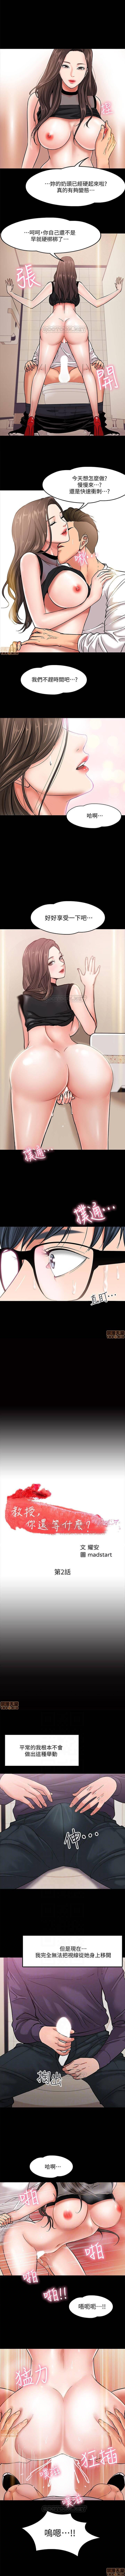 PROFESSOR, ARE YOU JUST GOING TO LOOK AT ME? | DESIRE SWAMP | 教授，你還等什麼? Ch. 2 [Chinese] Manhwa 